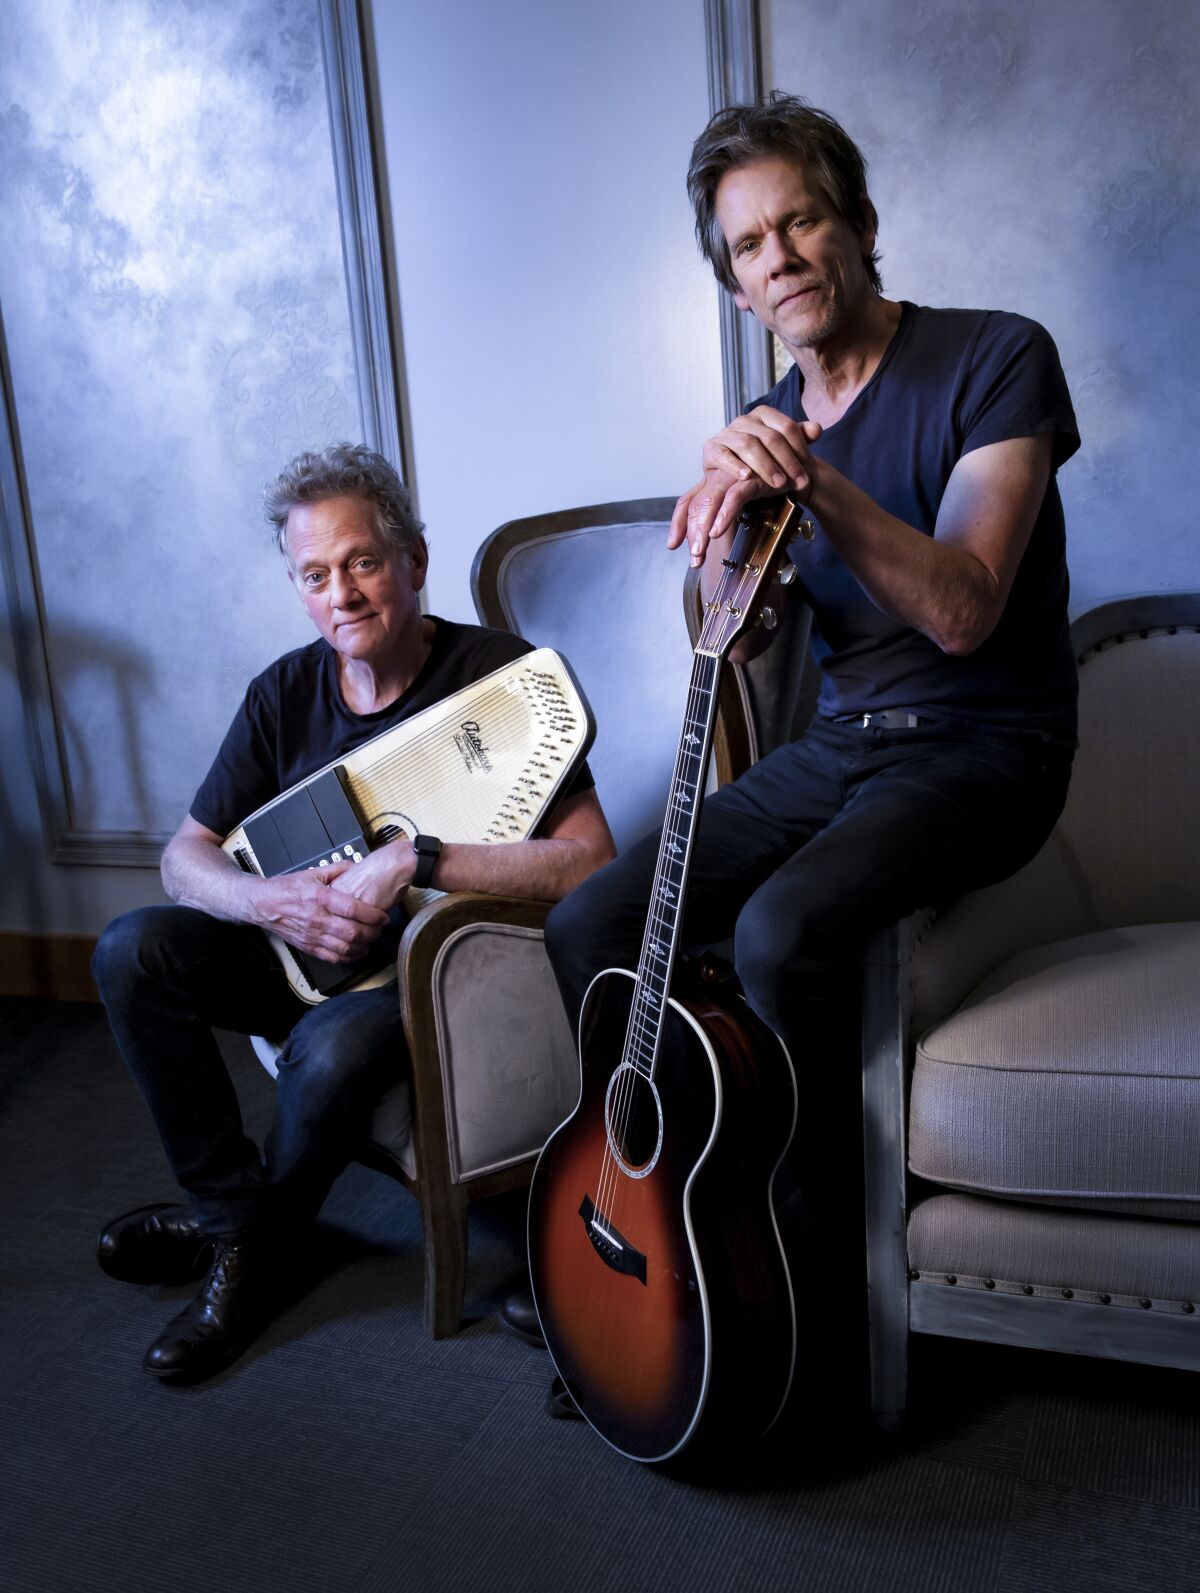 Kevin Bacon (left) and his brother, Michael, have been making music together as the Bacon Brothers since 1995.